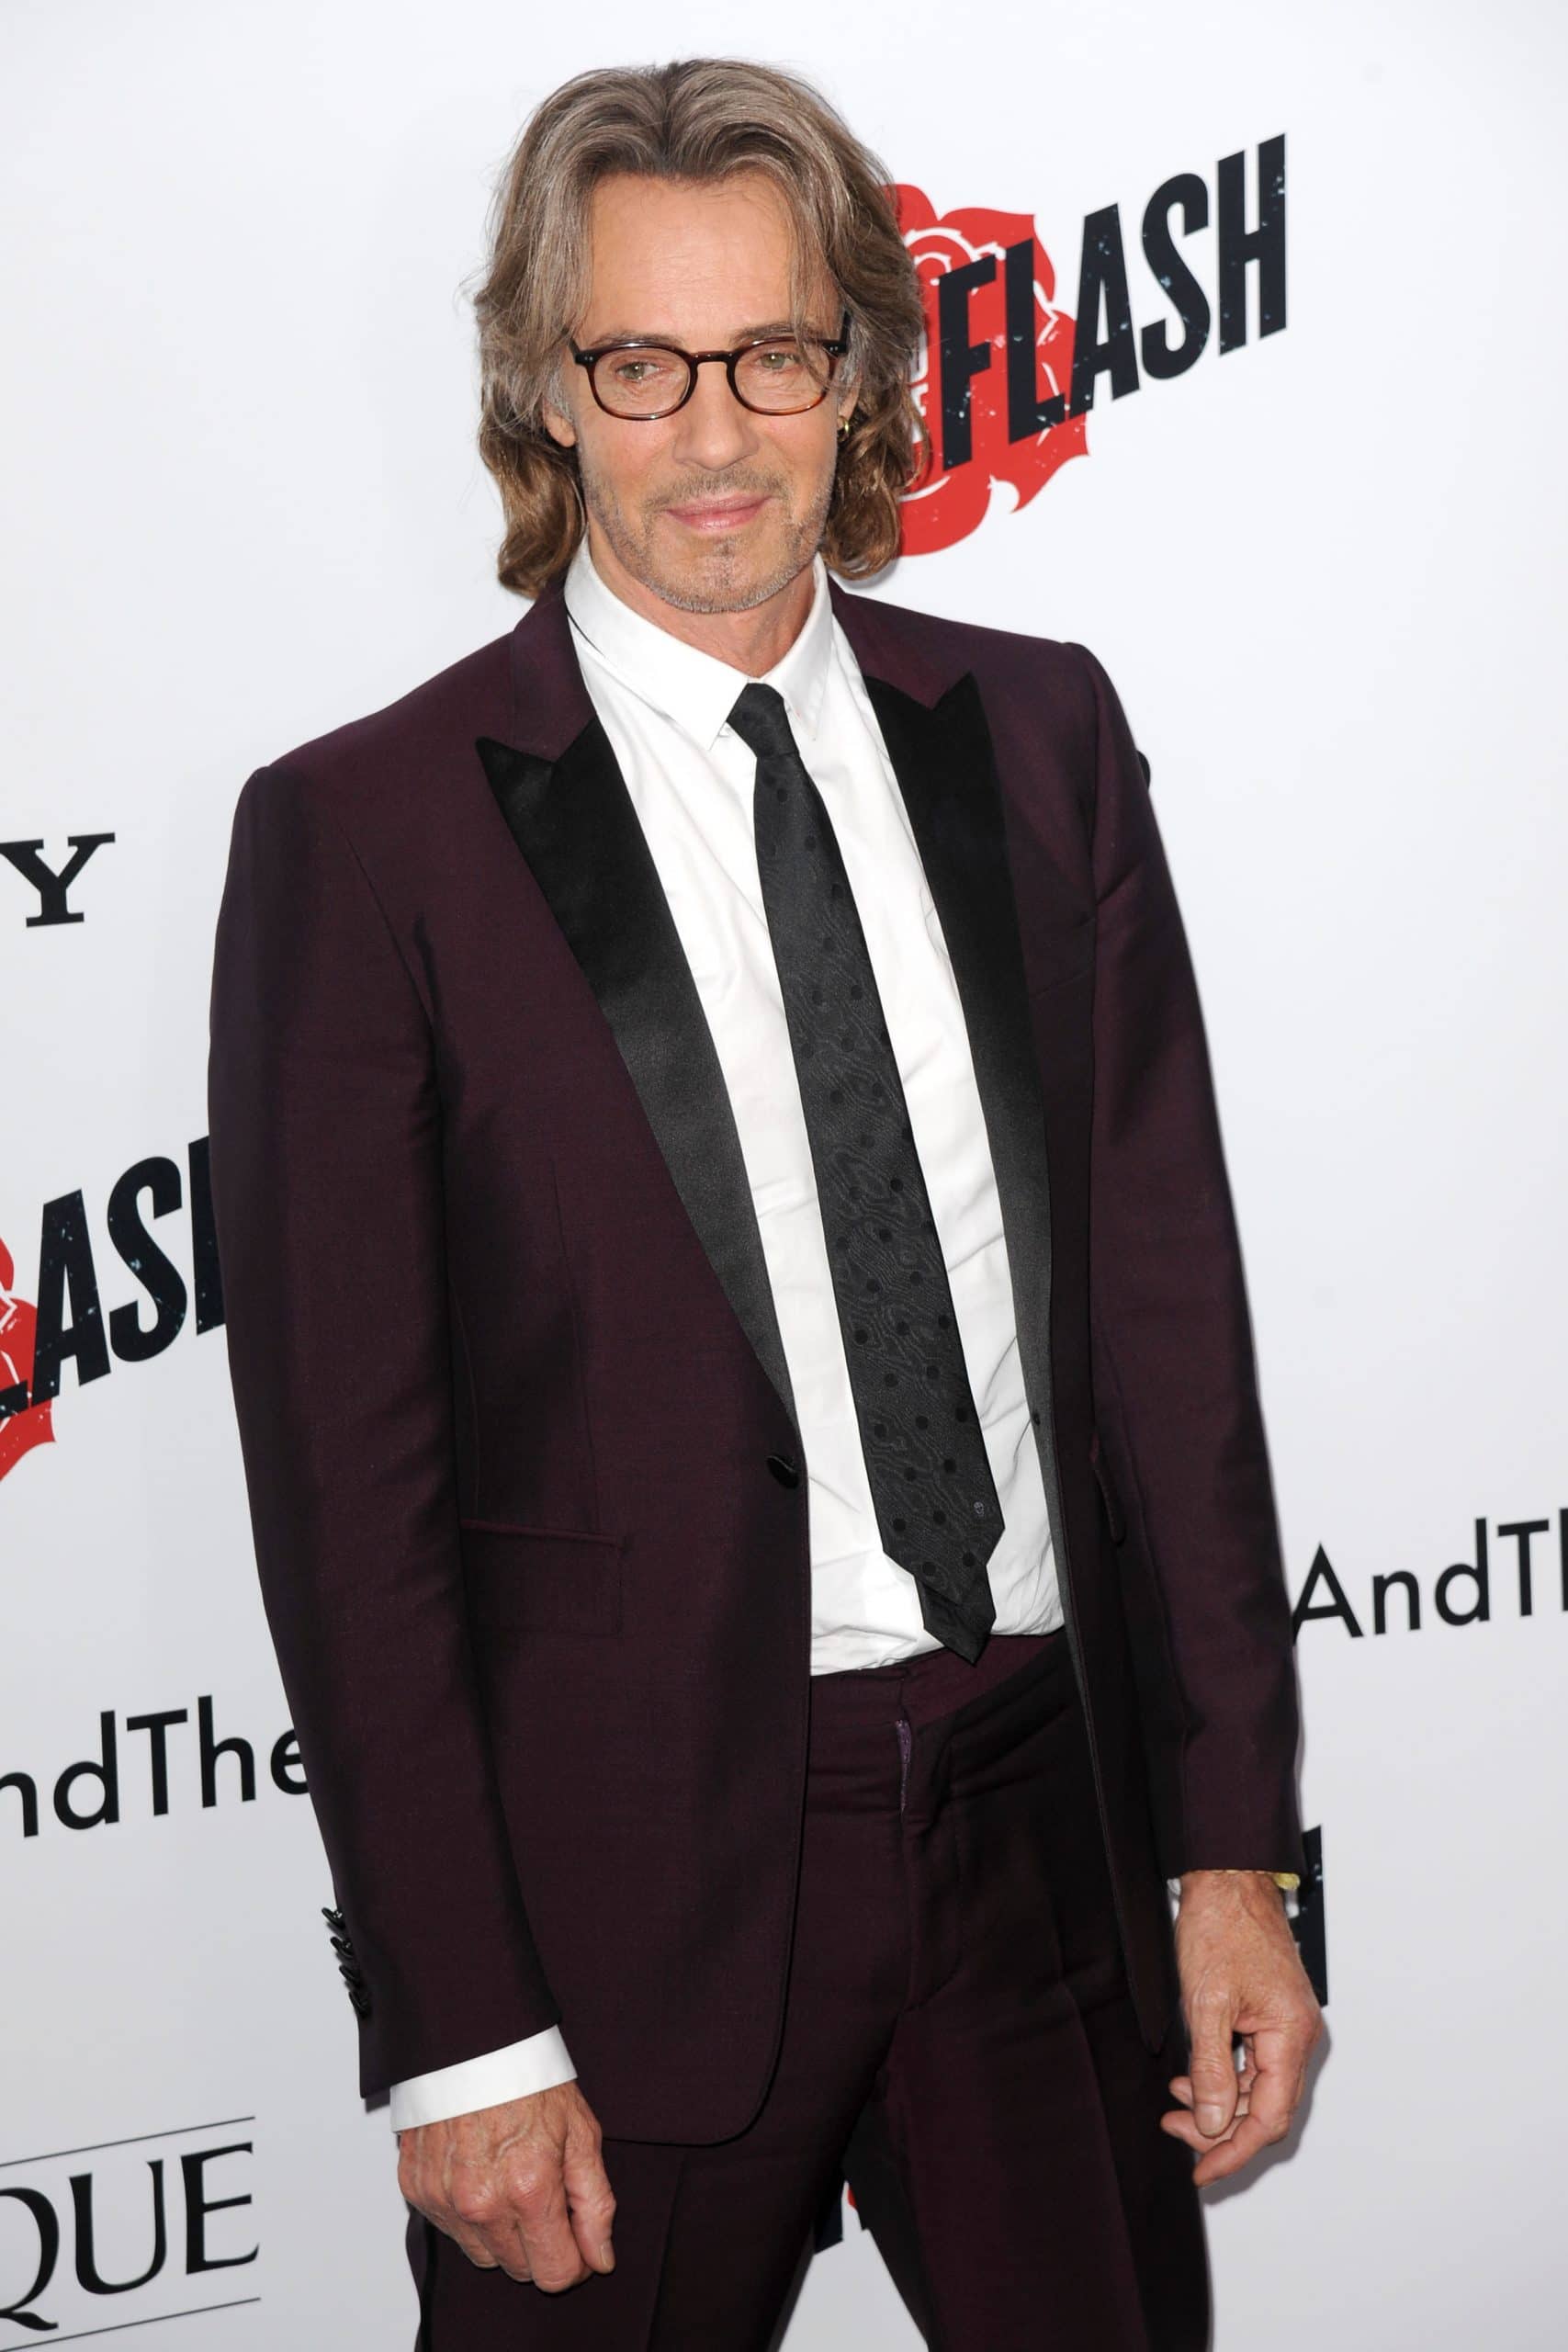 Rick Springfield Reveals He Has 'Lots Of Sex' With Wife Of 36 Years During COVID Lockdown